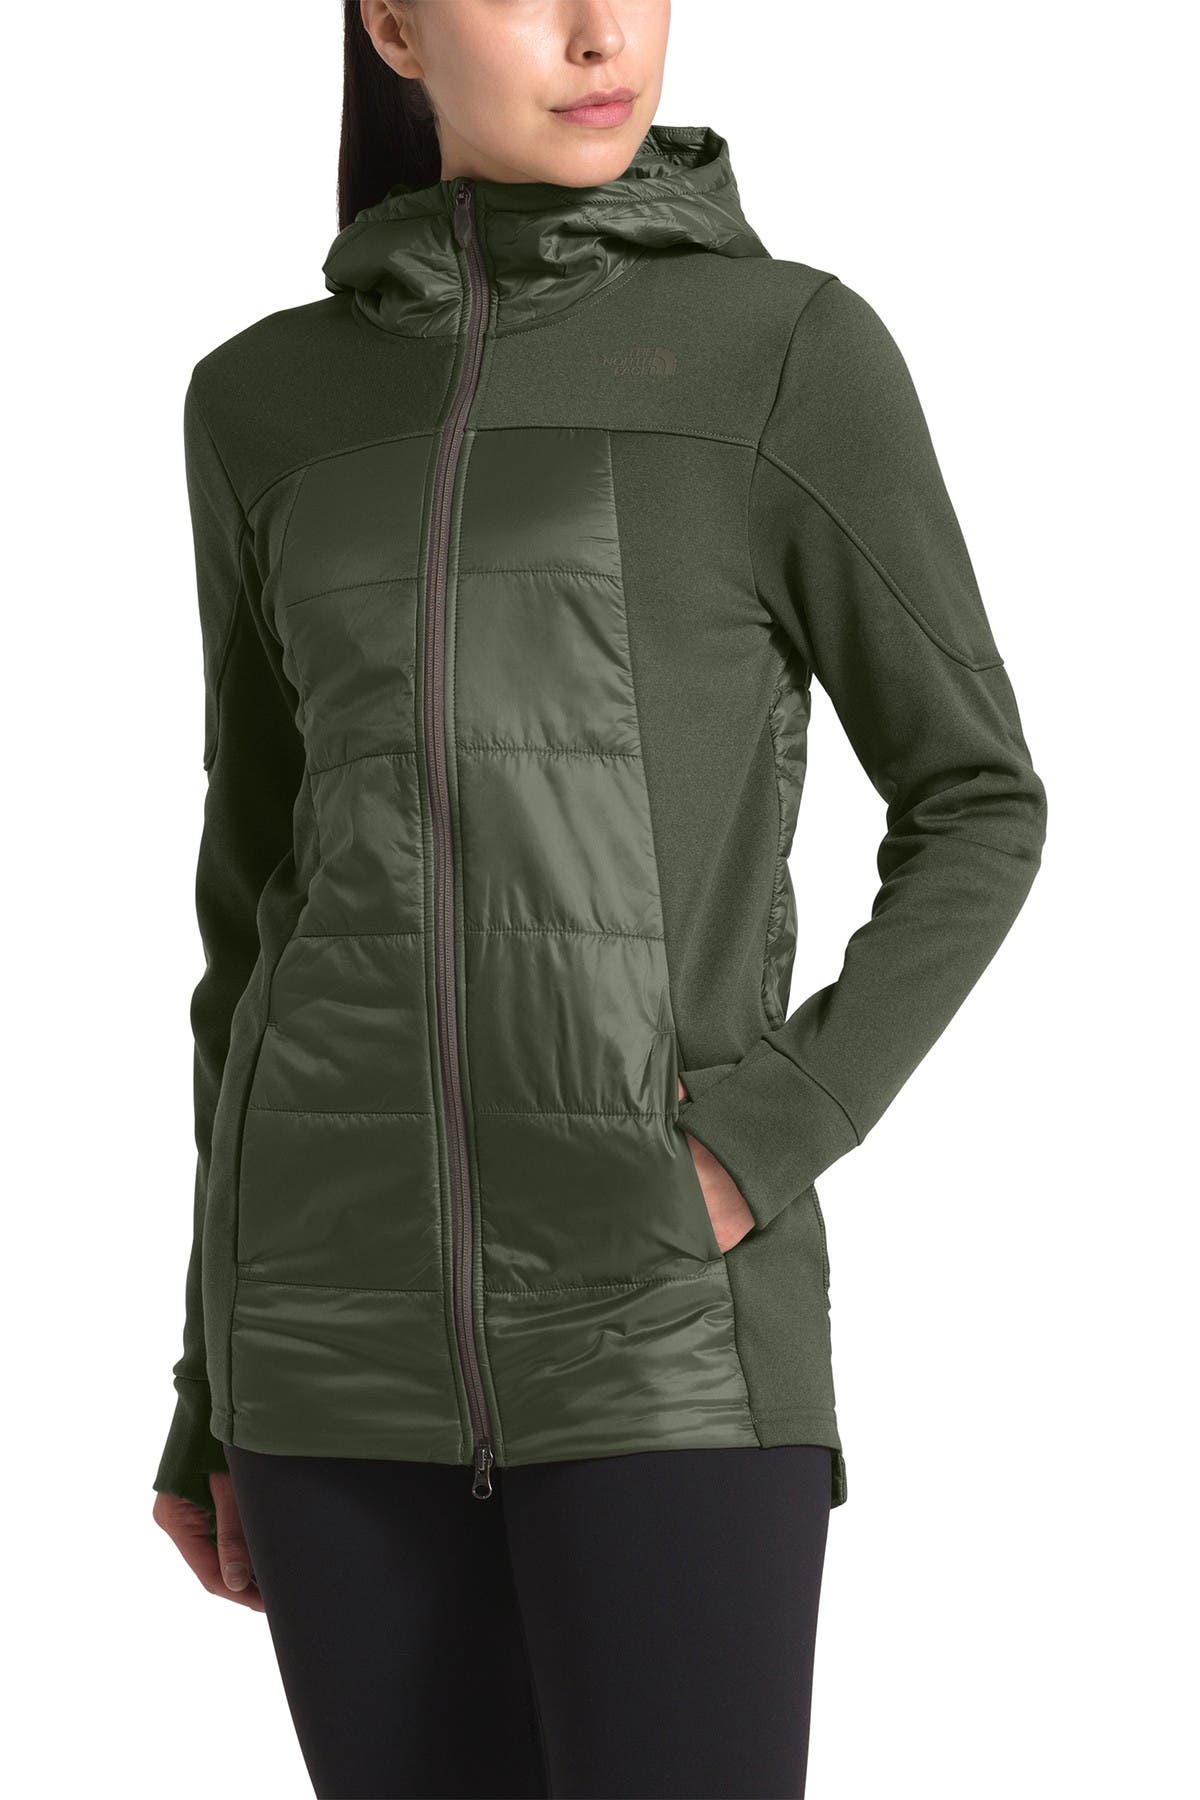 women's motivation thermoball jacket